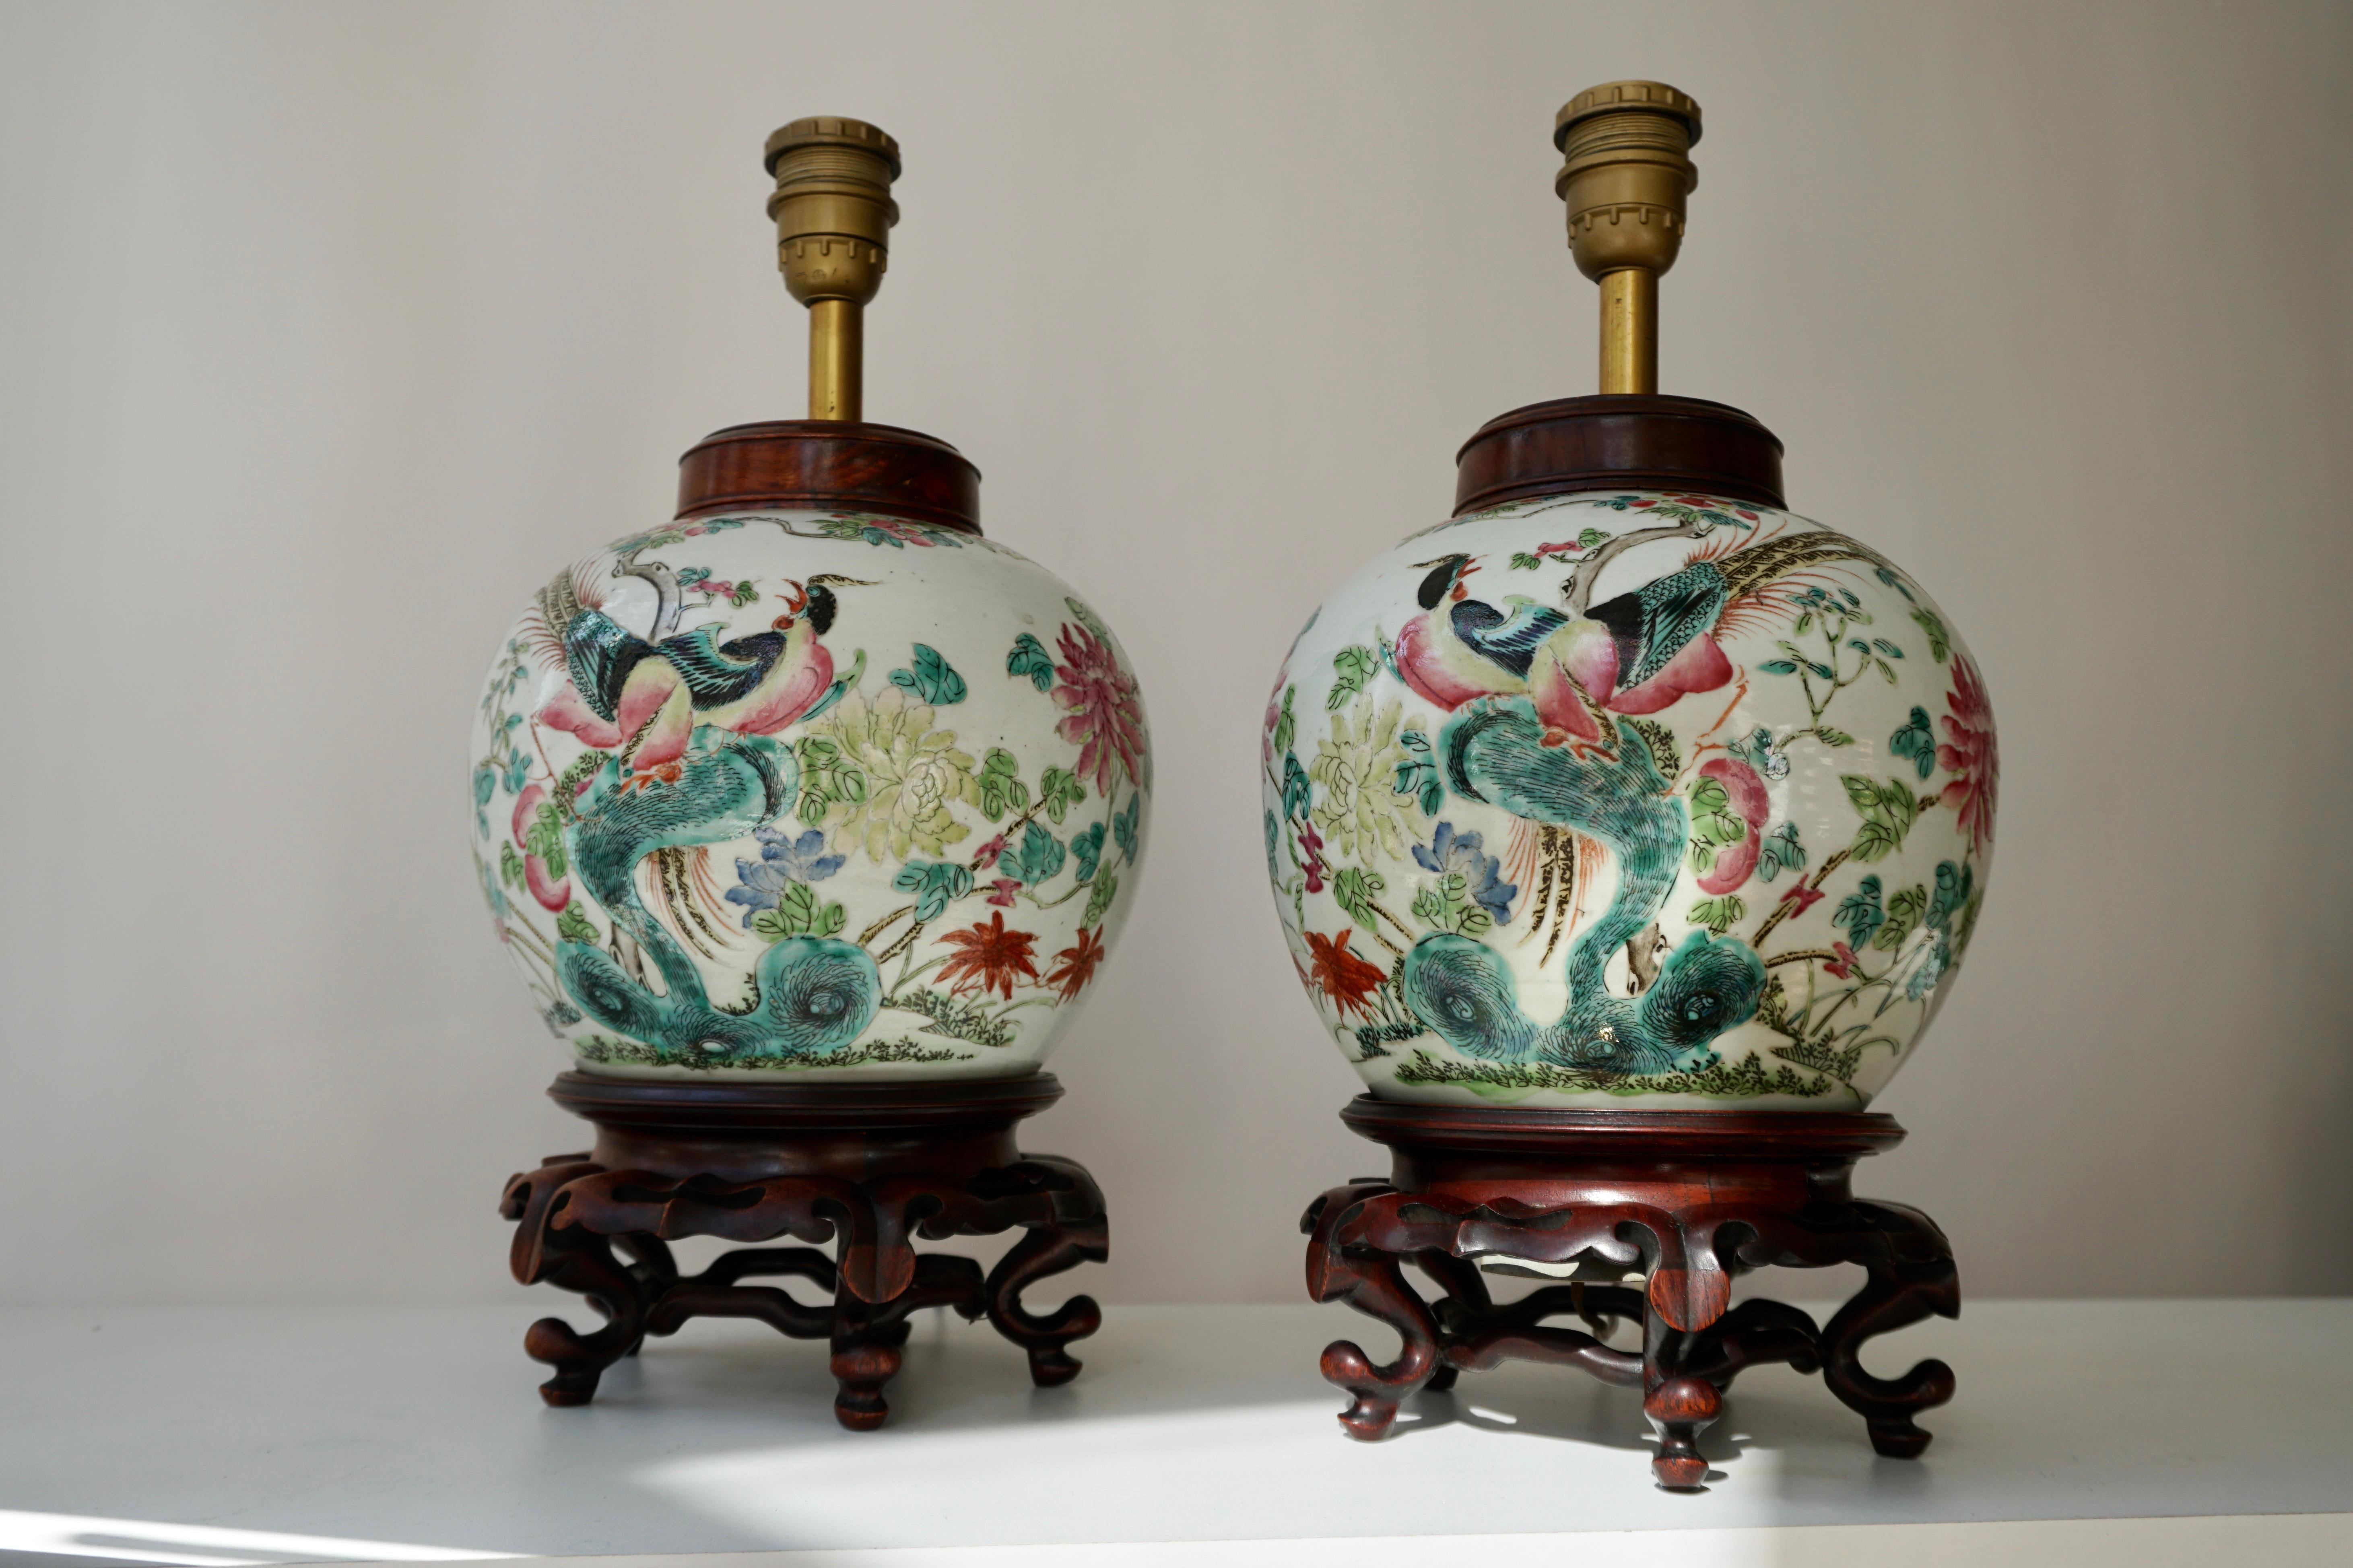 Hollywood Regency Pair of Chinese Export Porcelain Painted Ginger Jar Table Lamps with Birds